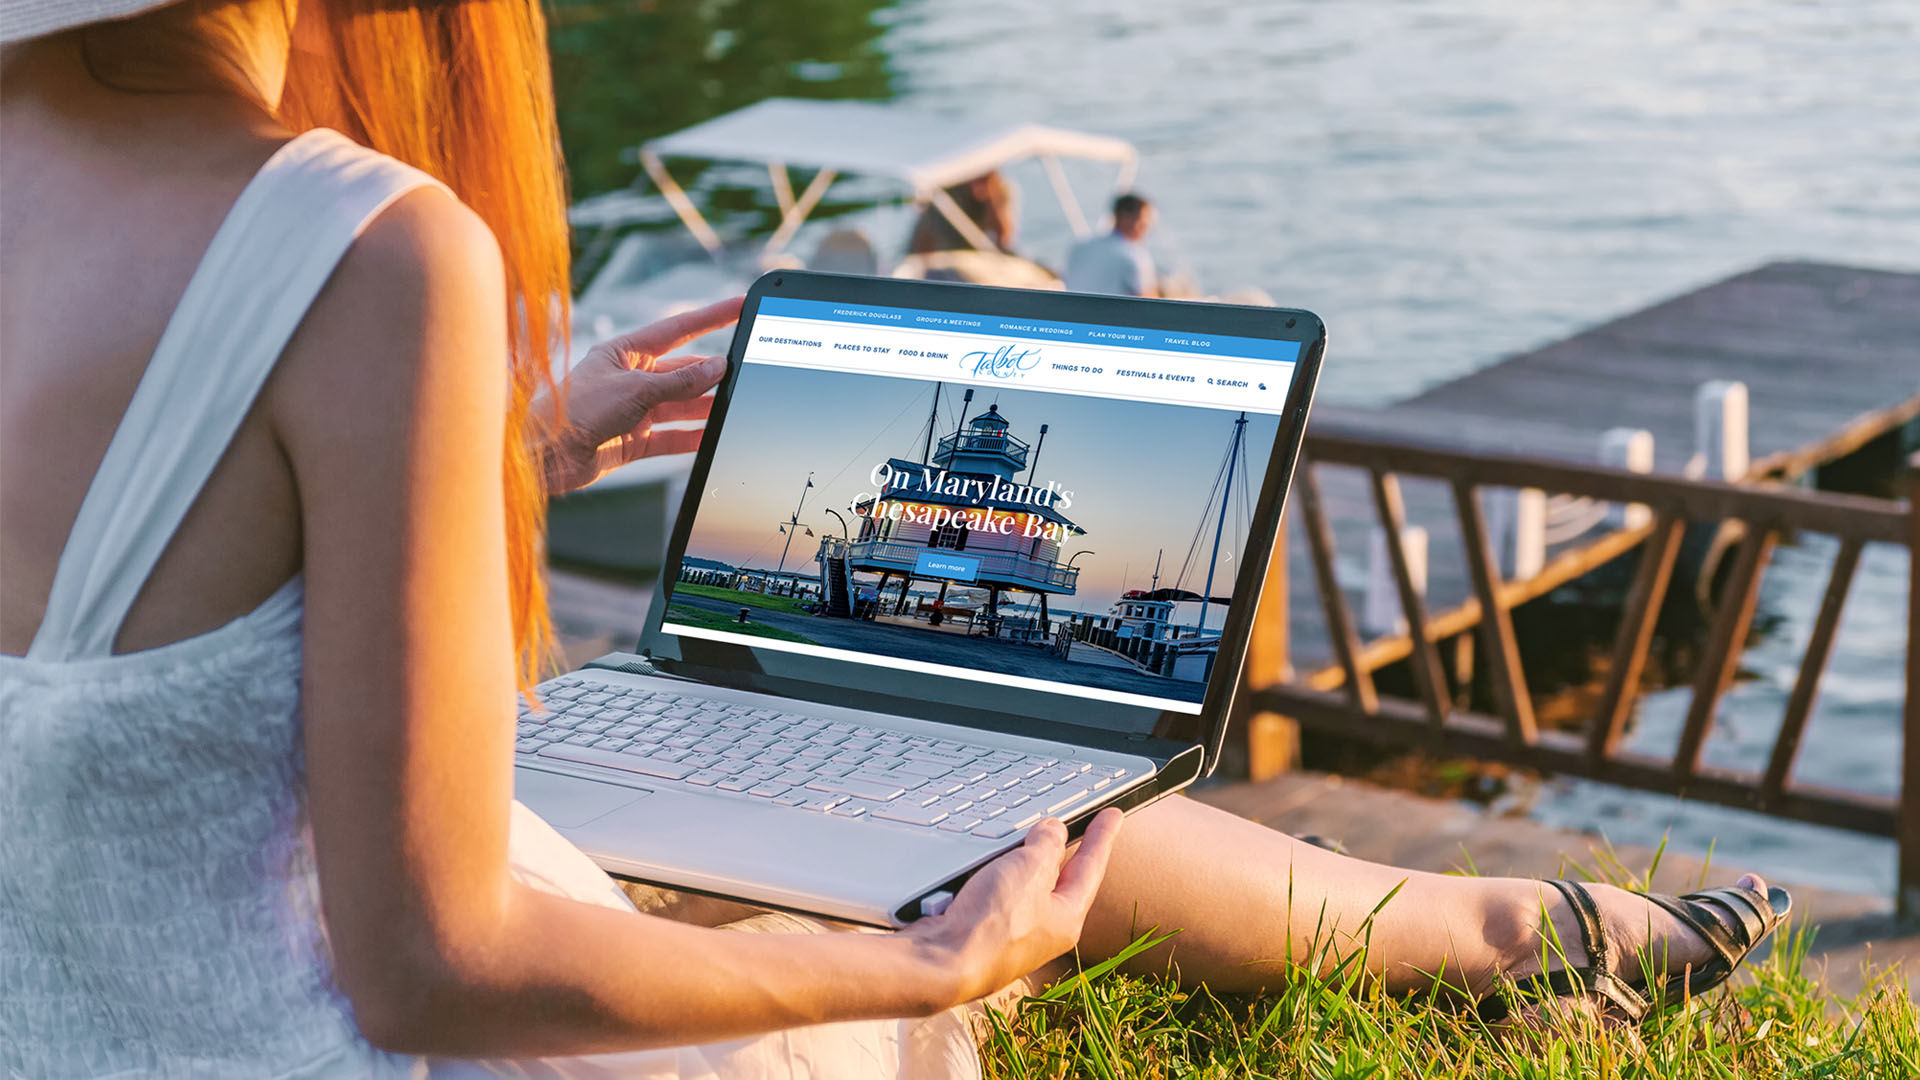 The Talbot County tourism web design being browsed waterside by a local woman on a laptop